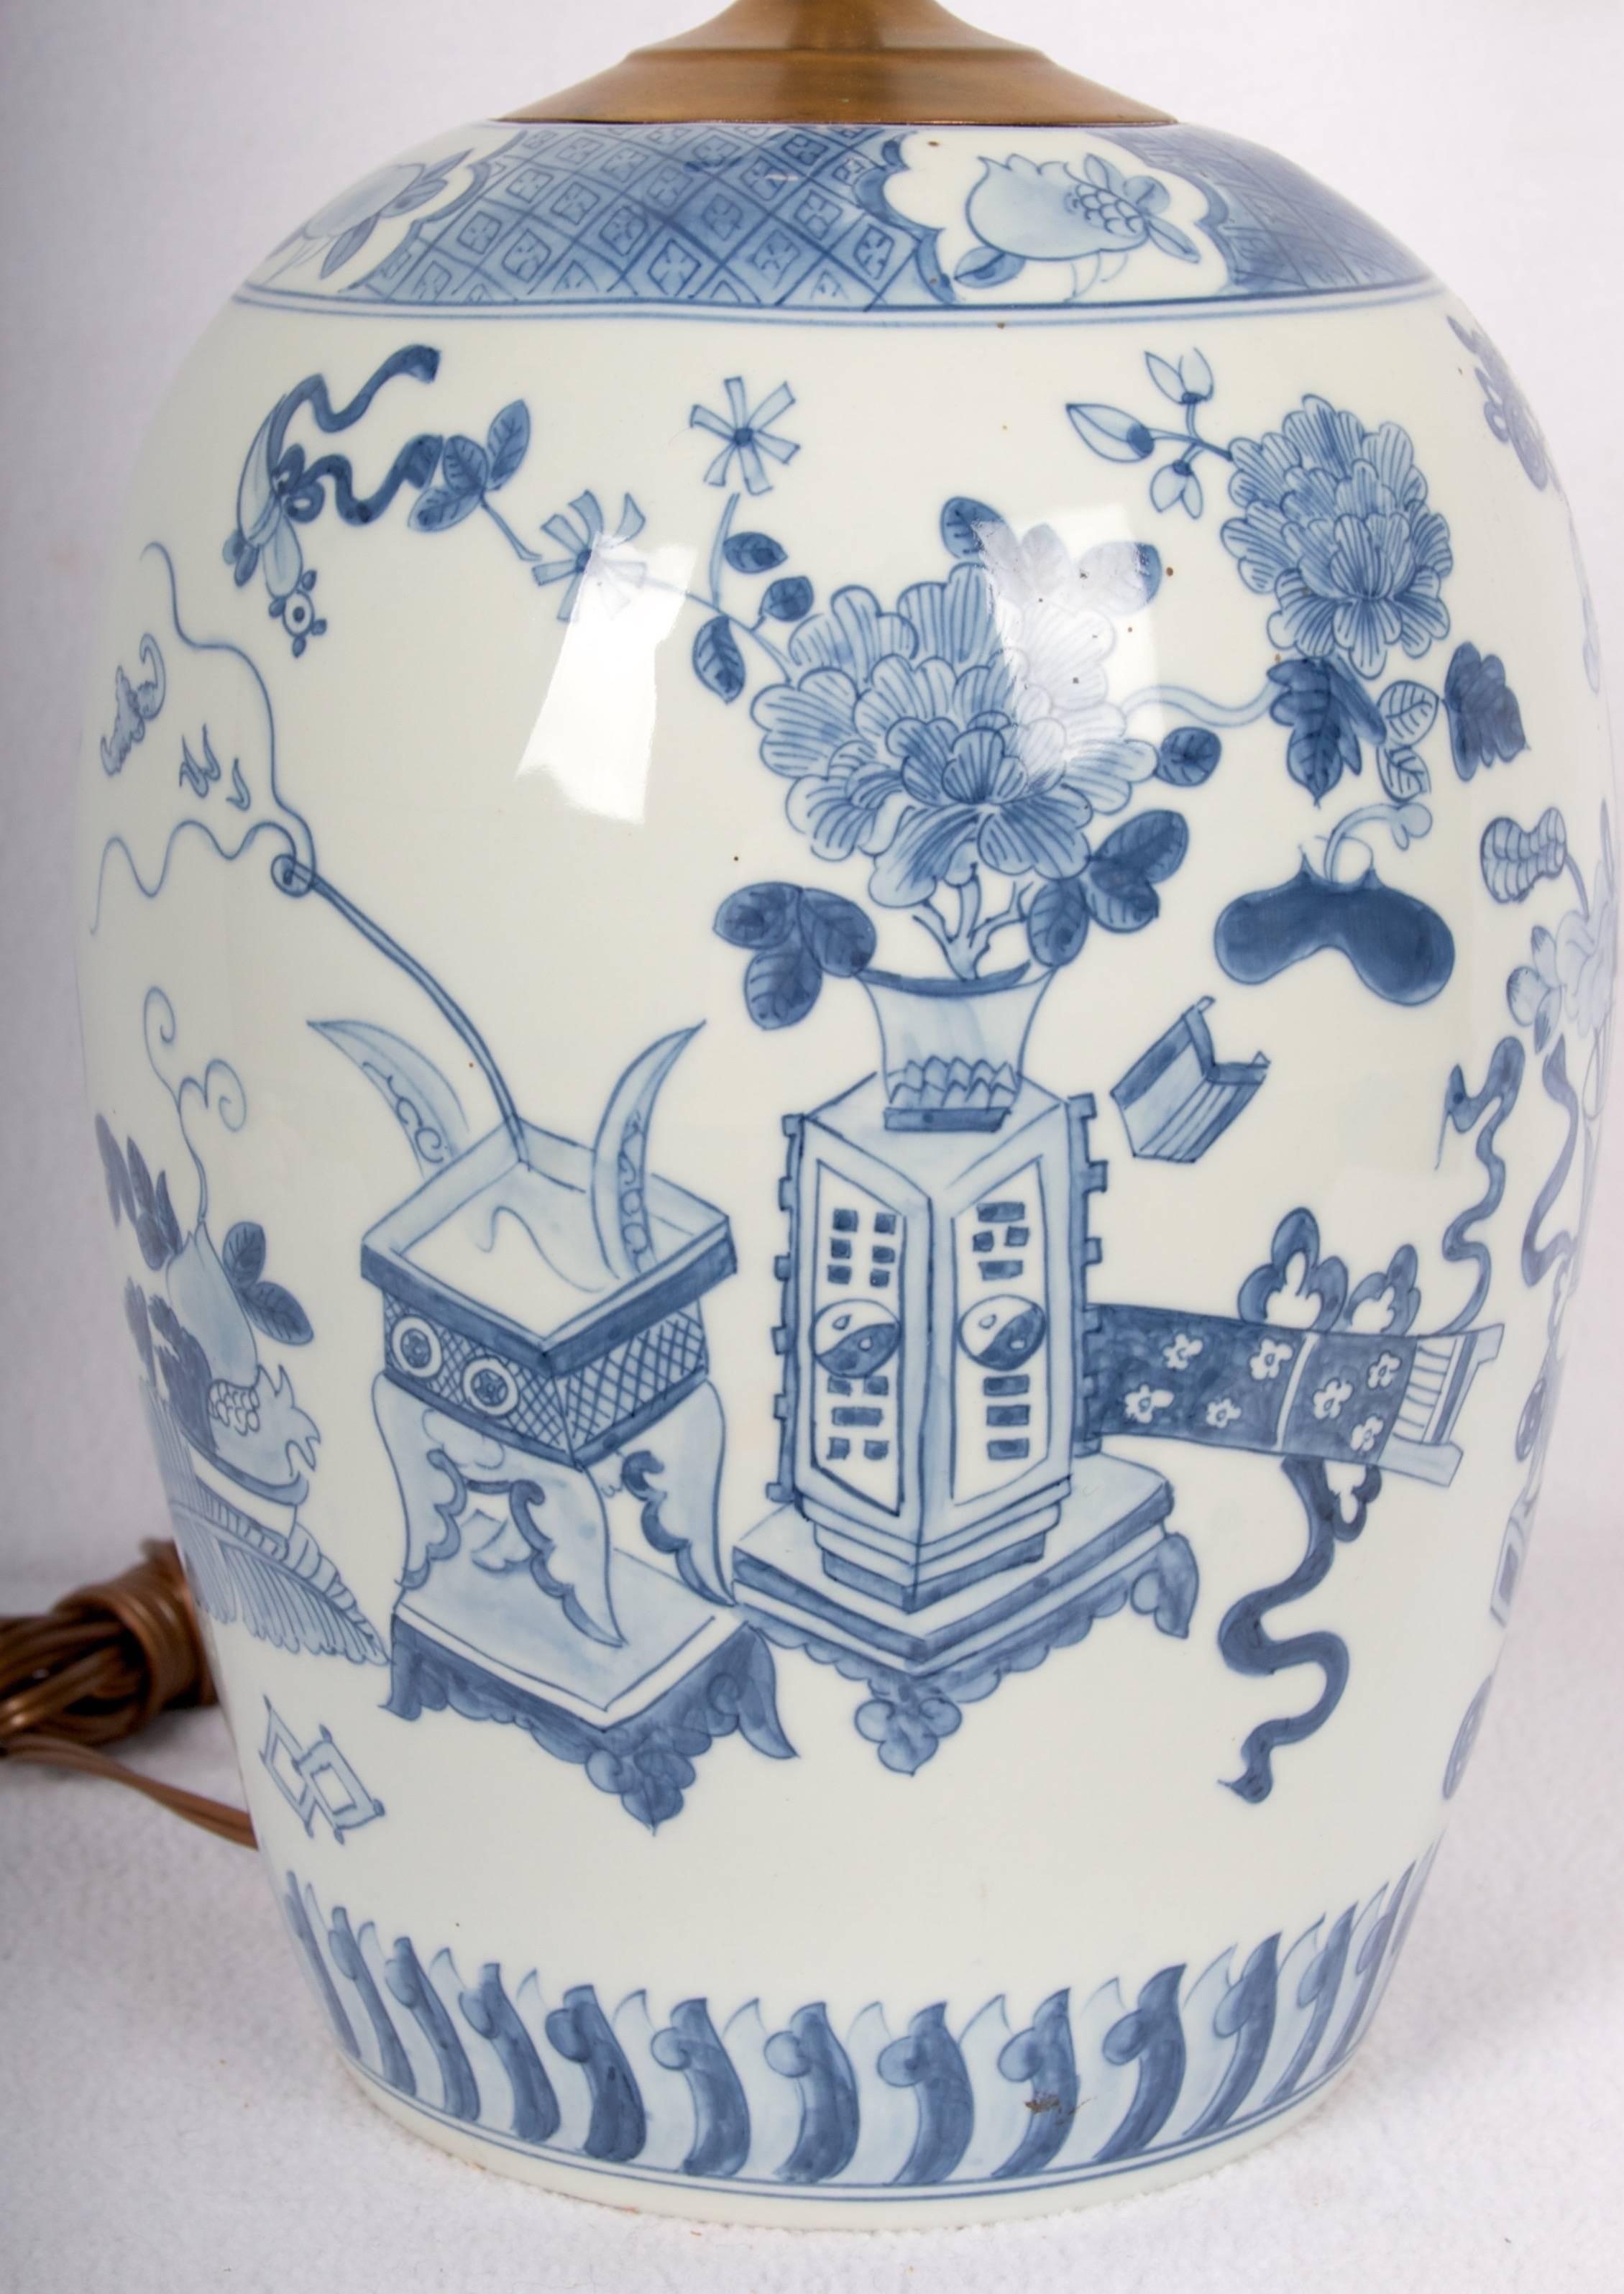 This is a lovely and very decorative Chinese blue and white ginger jar shaped
lamp. The decorations are fine and very lovely.